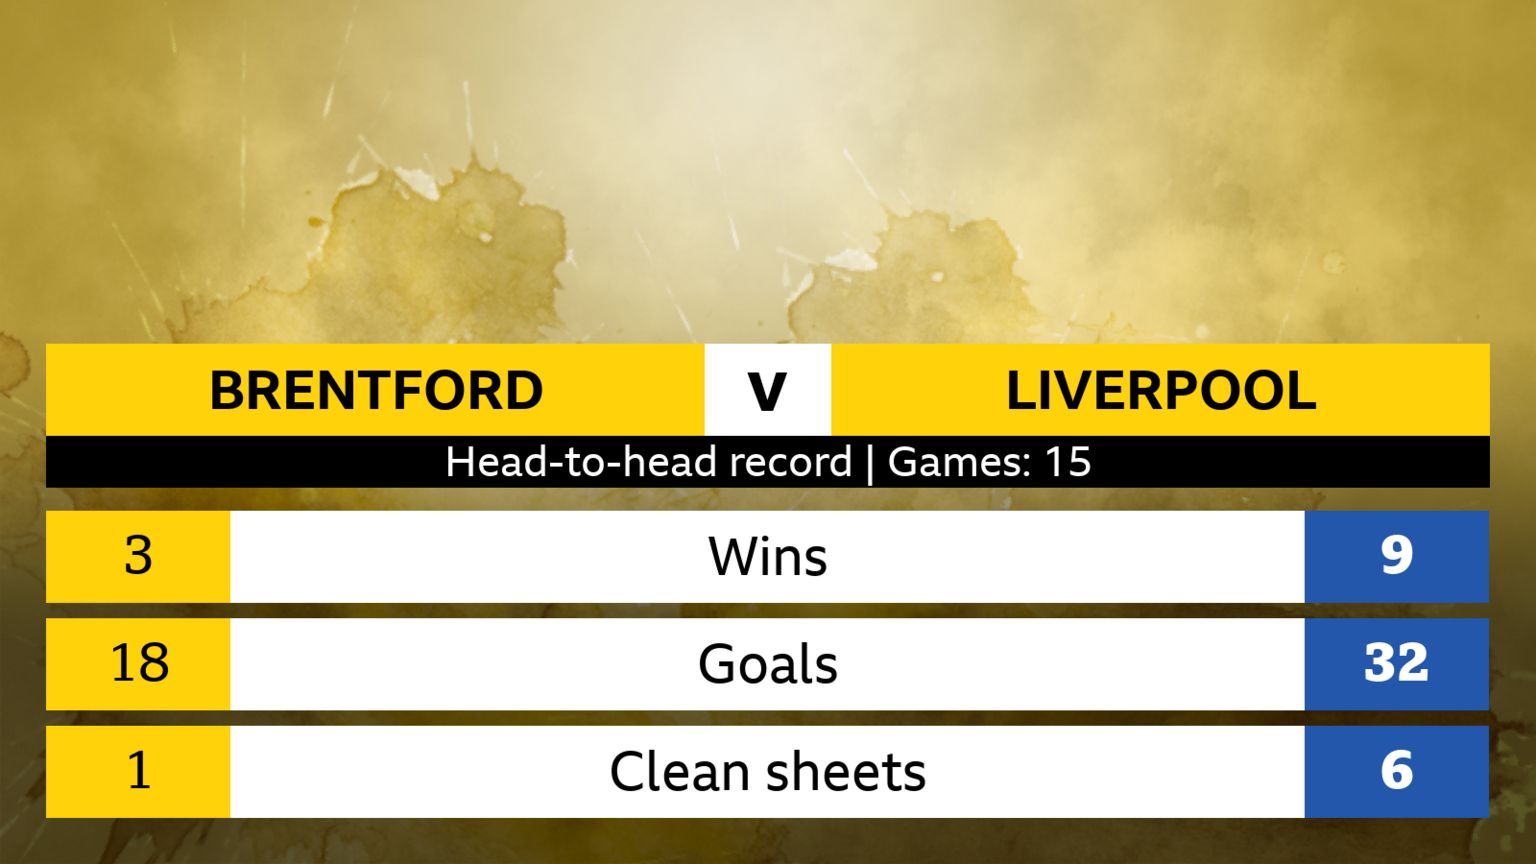 Brentford v Liverpool, head-to-head stats over 15 previous league and cup meetings (Brentford number first): Wins 3-9, Goals 18-32, Clean sheets 1-6